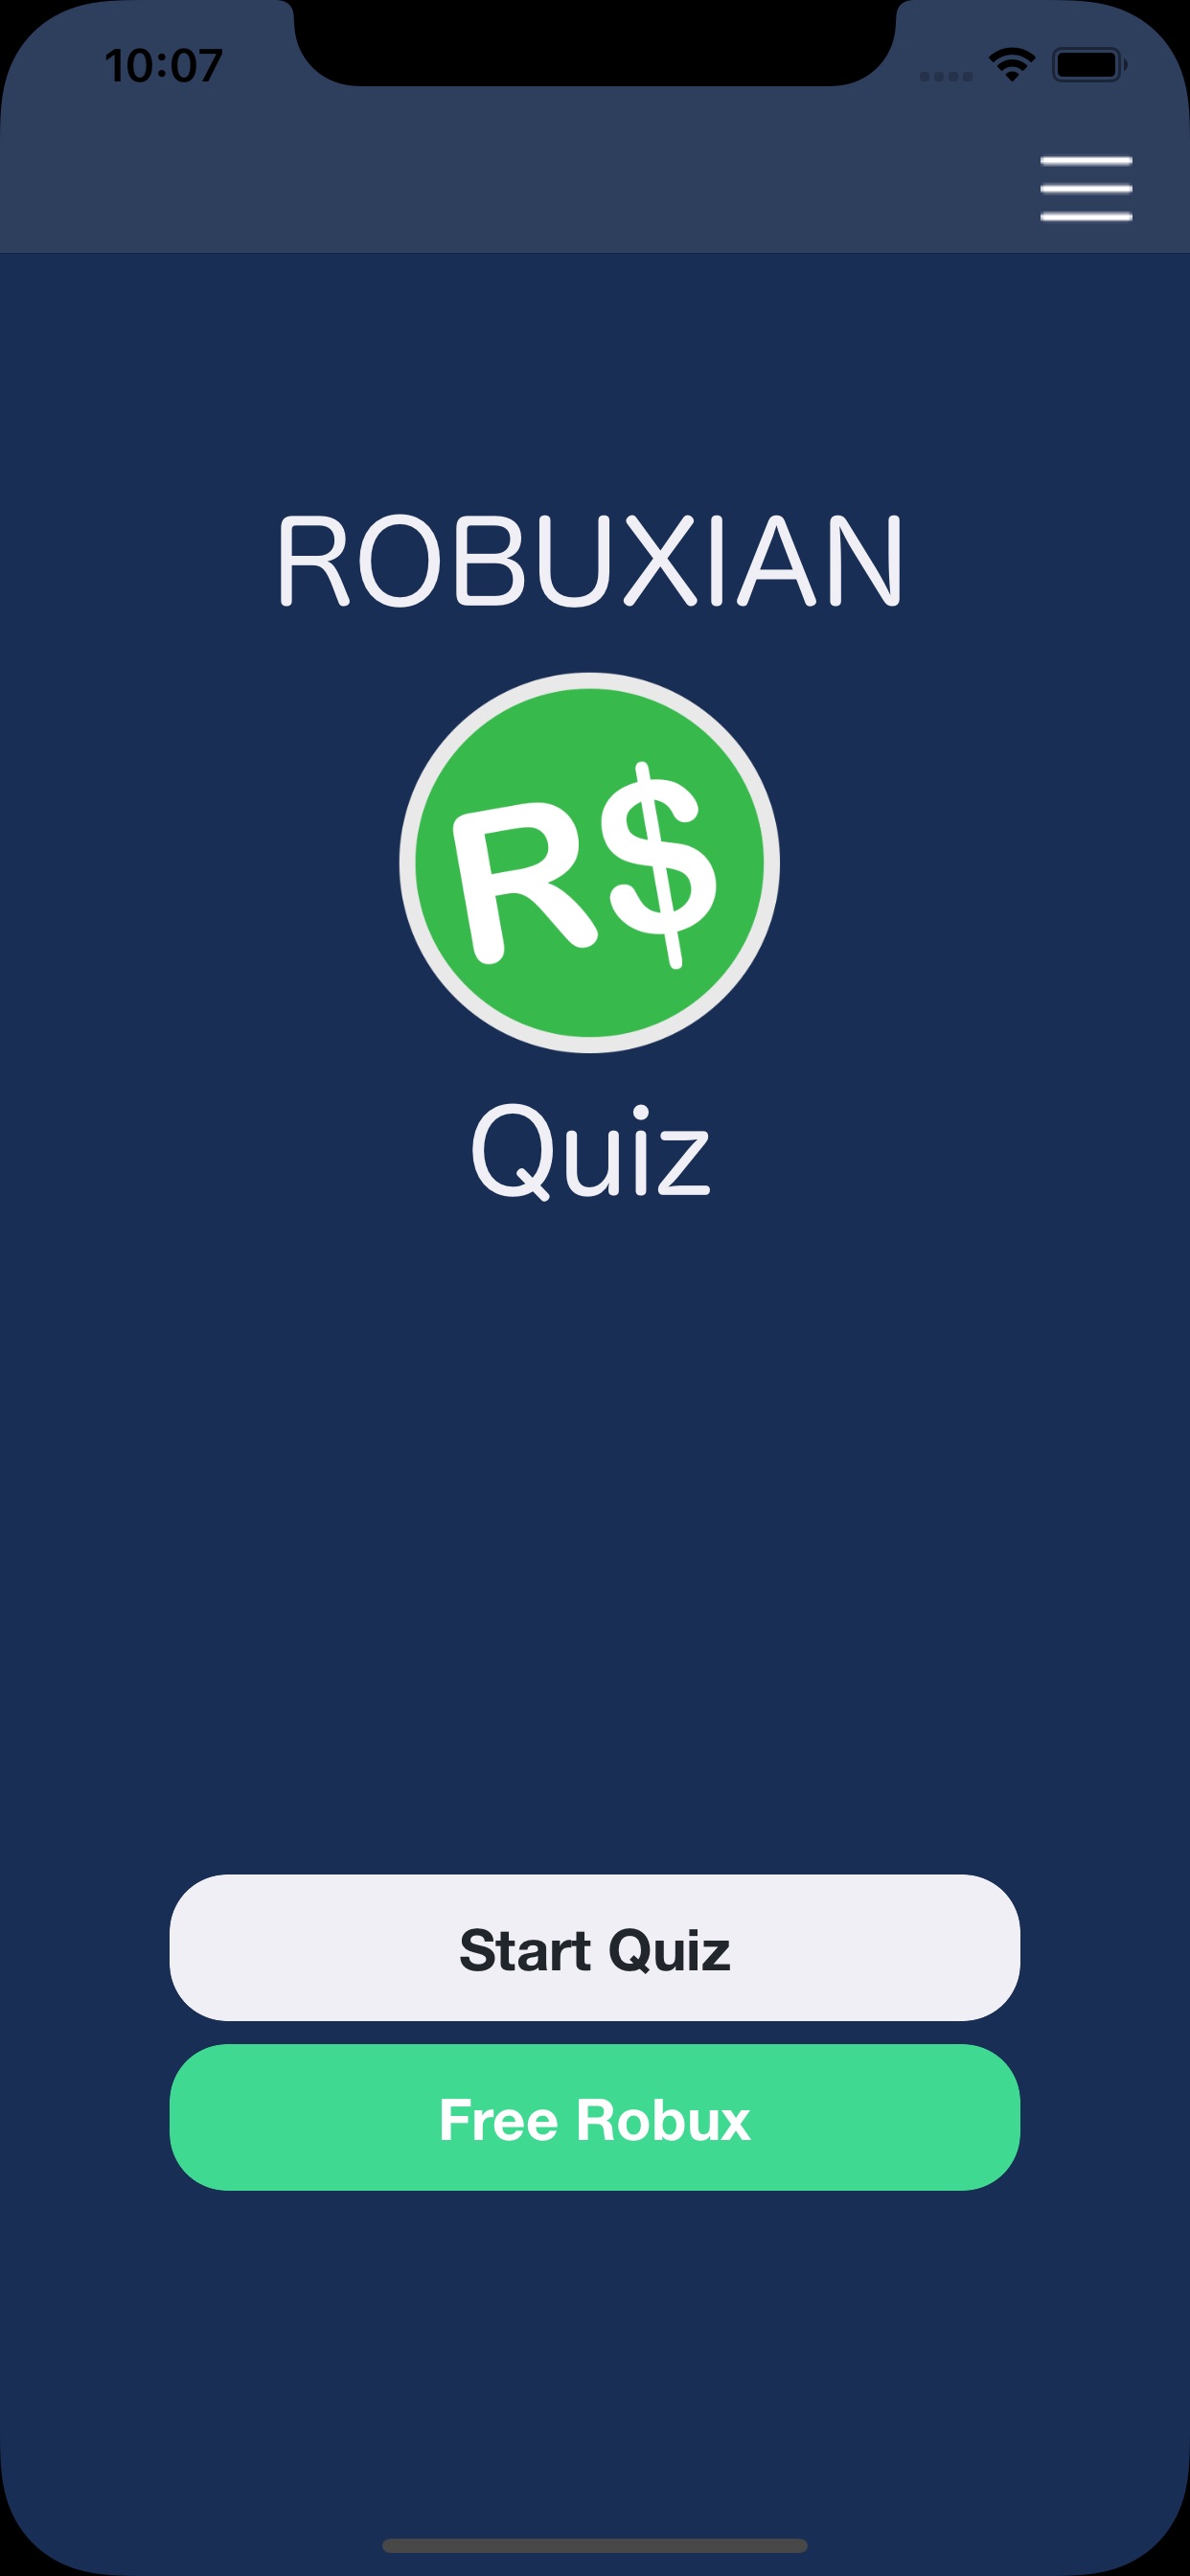 Robuxian Quiz For Robux App Store Review Aso Revenue Downloads Appfollow - robuxian com free robux